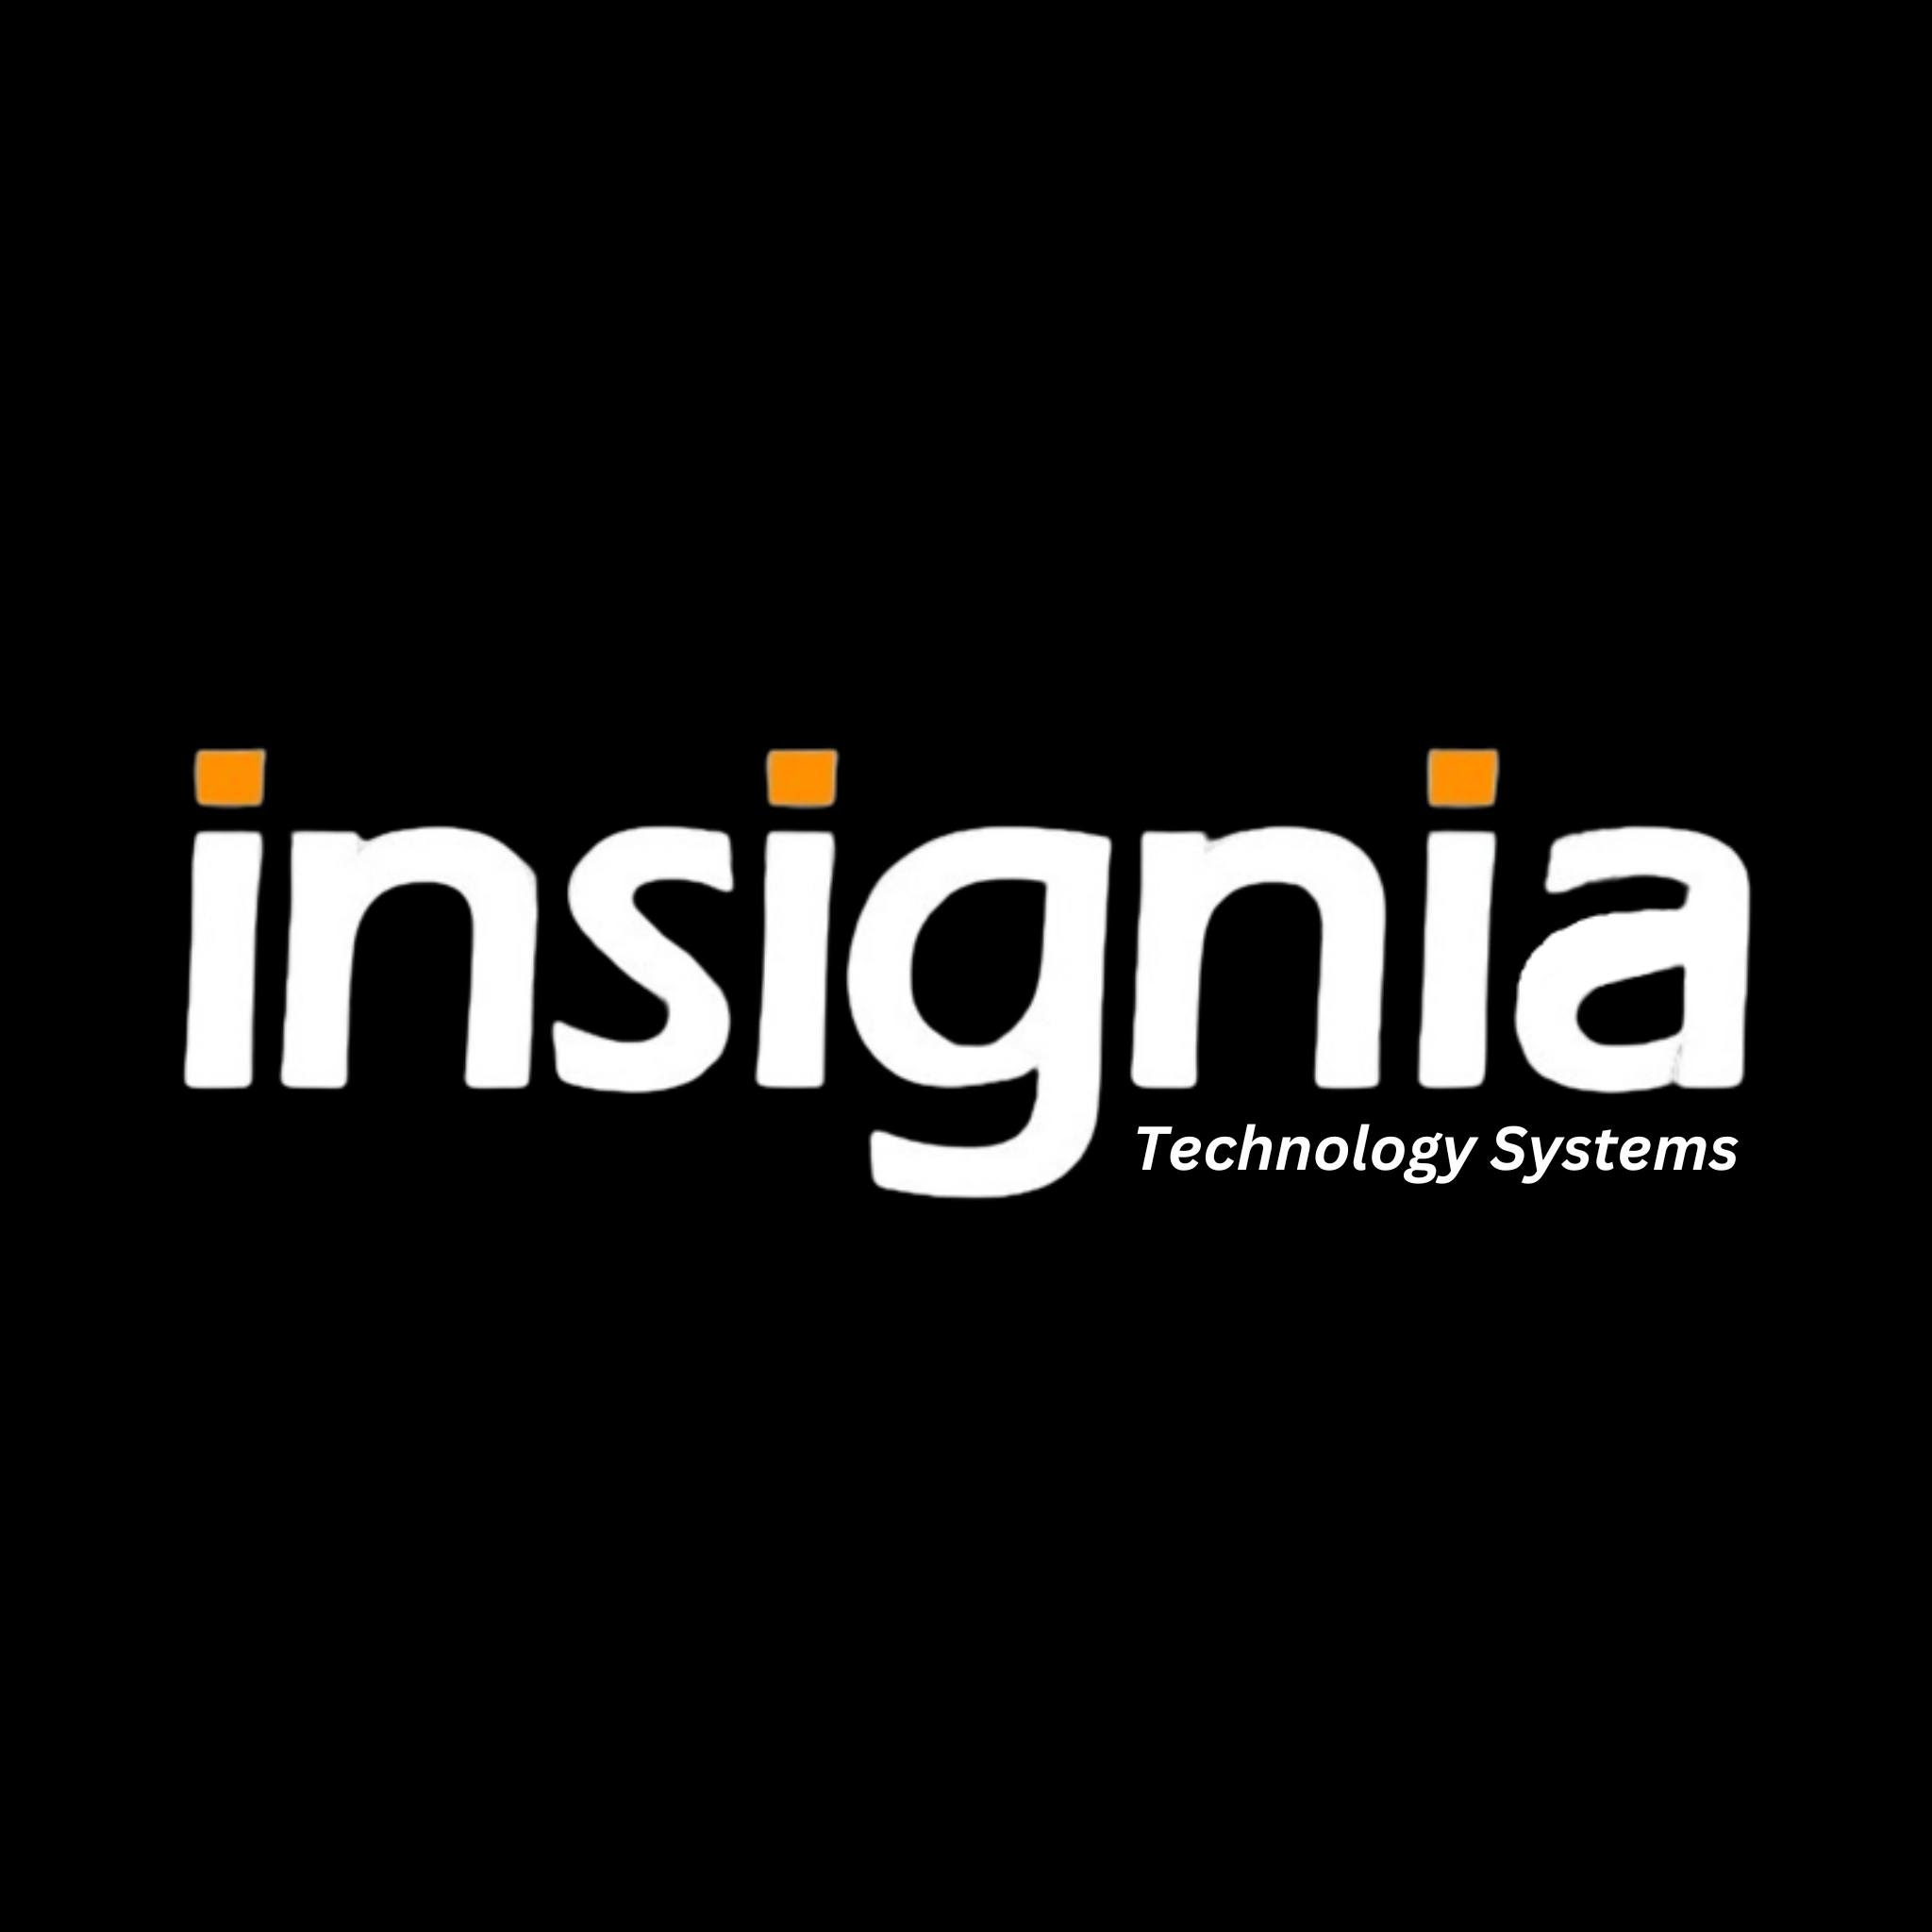 Insignia Technology Systems